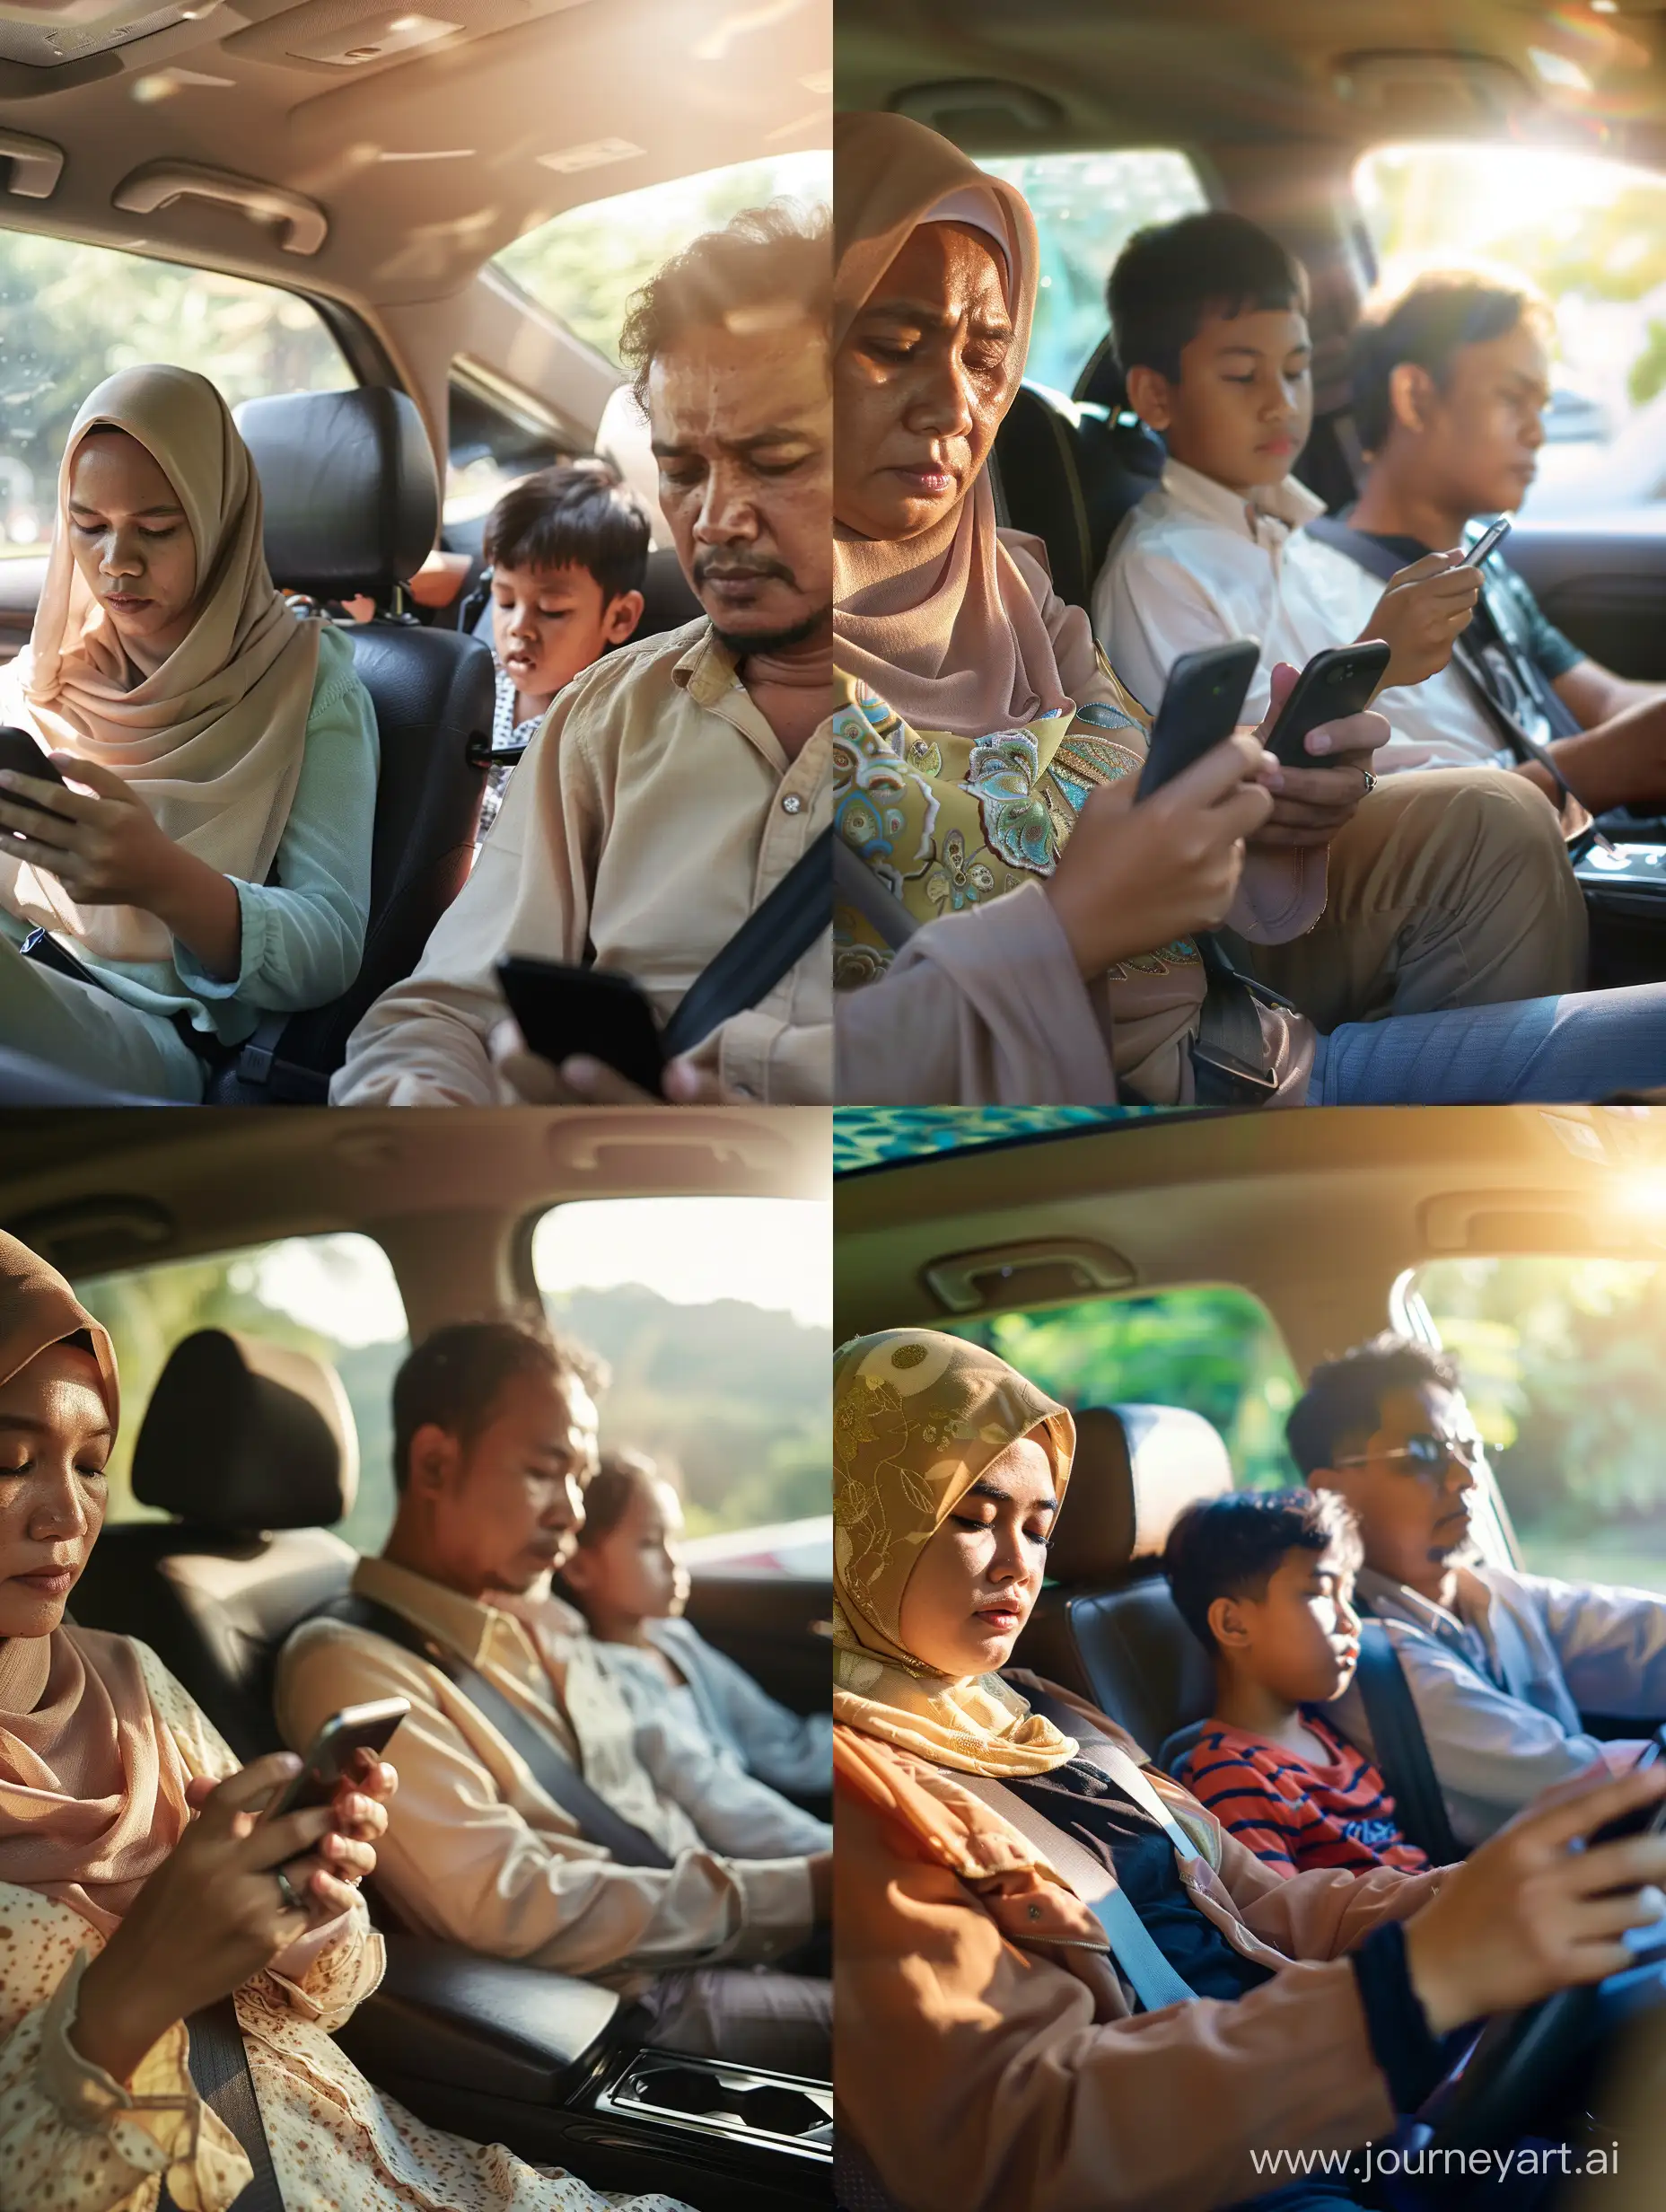 Malay-Family-Road-Trip-Bonding-and-Mobile-Devices